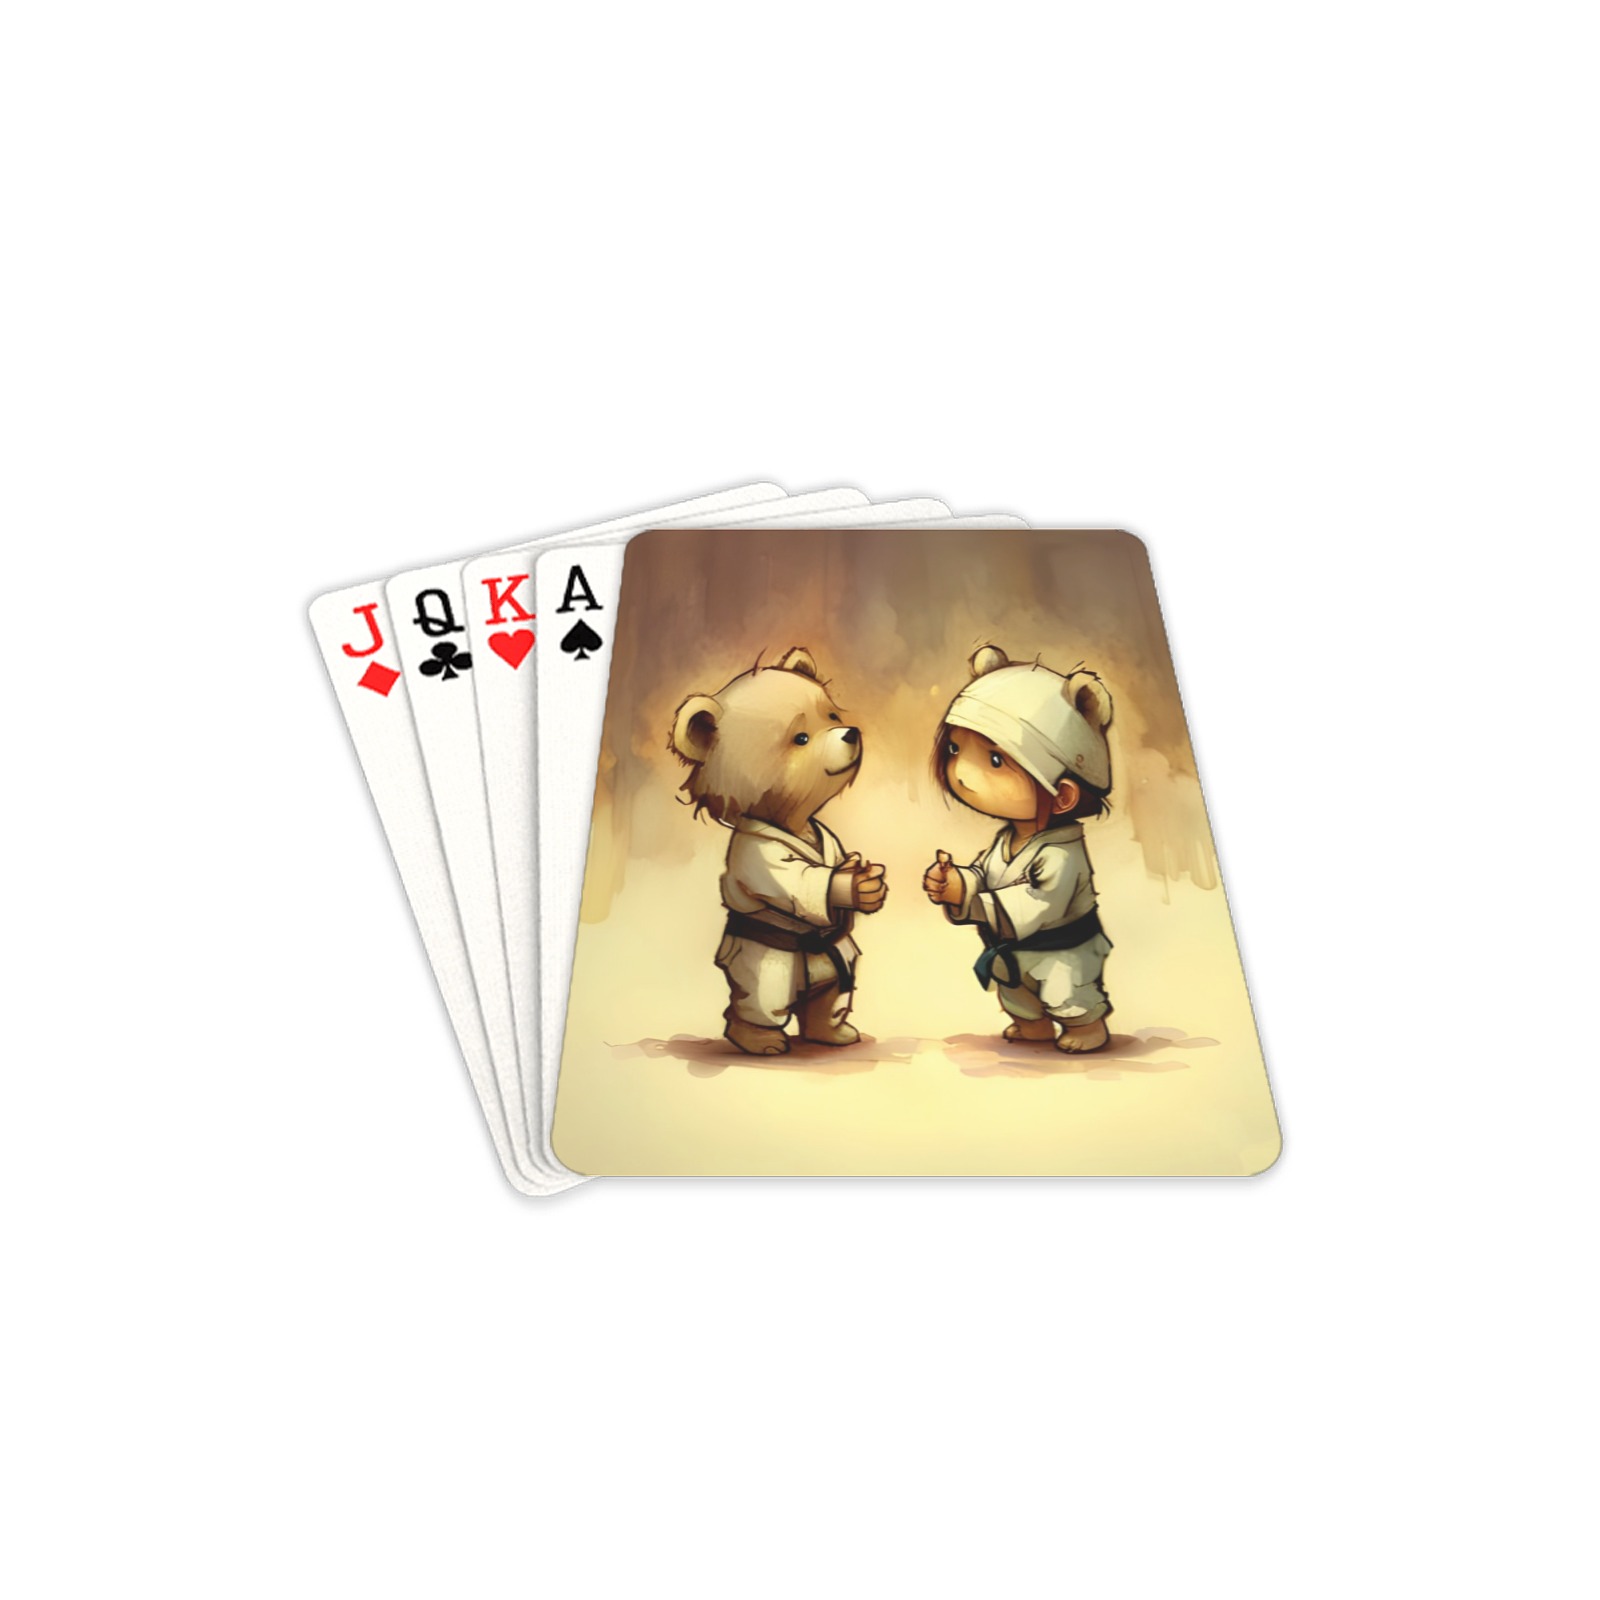 Little Bears 5 Playing Cards 2.5"x3.5"